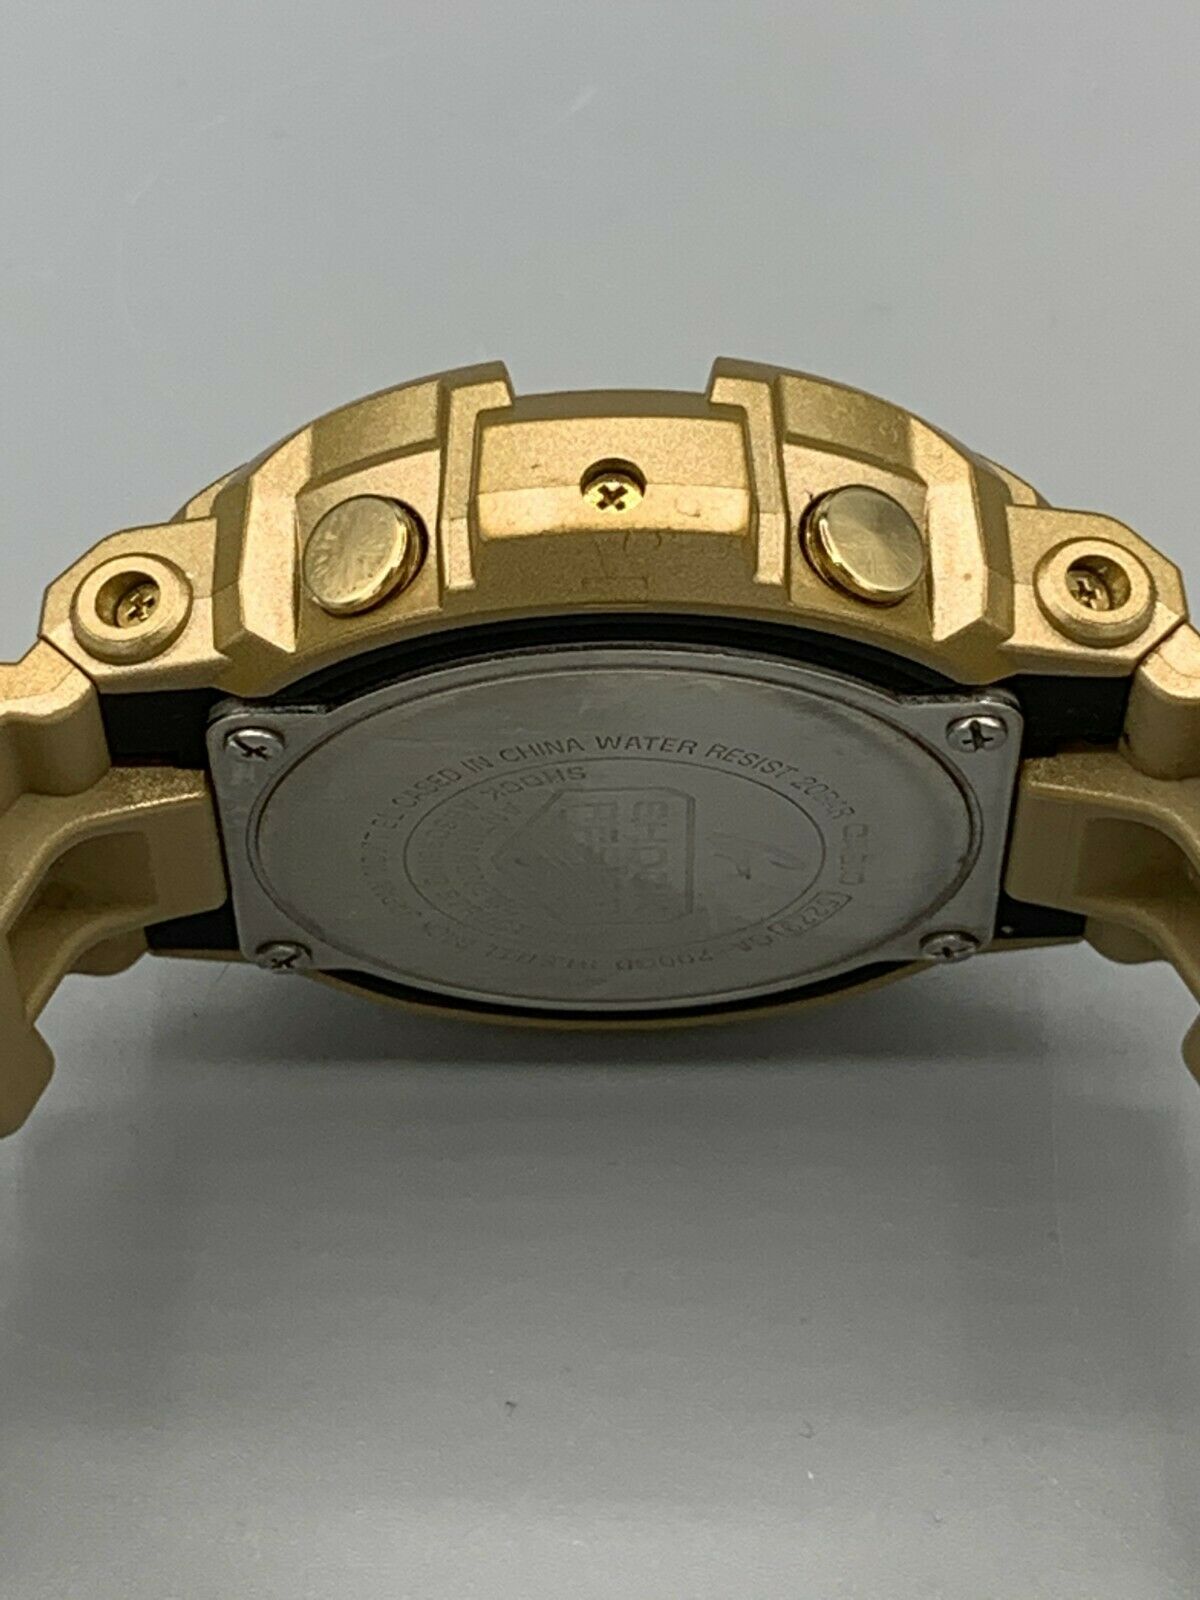 Casio G-Shock 5229 GA-200GD GOLD SERIES COLLECTION